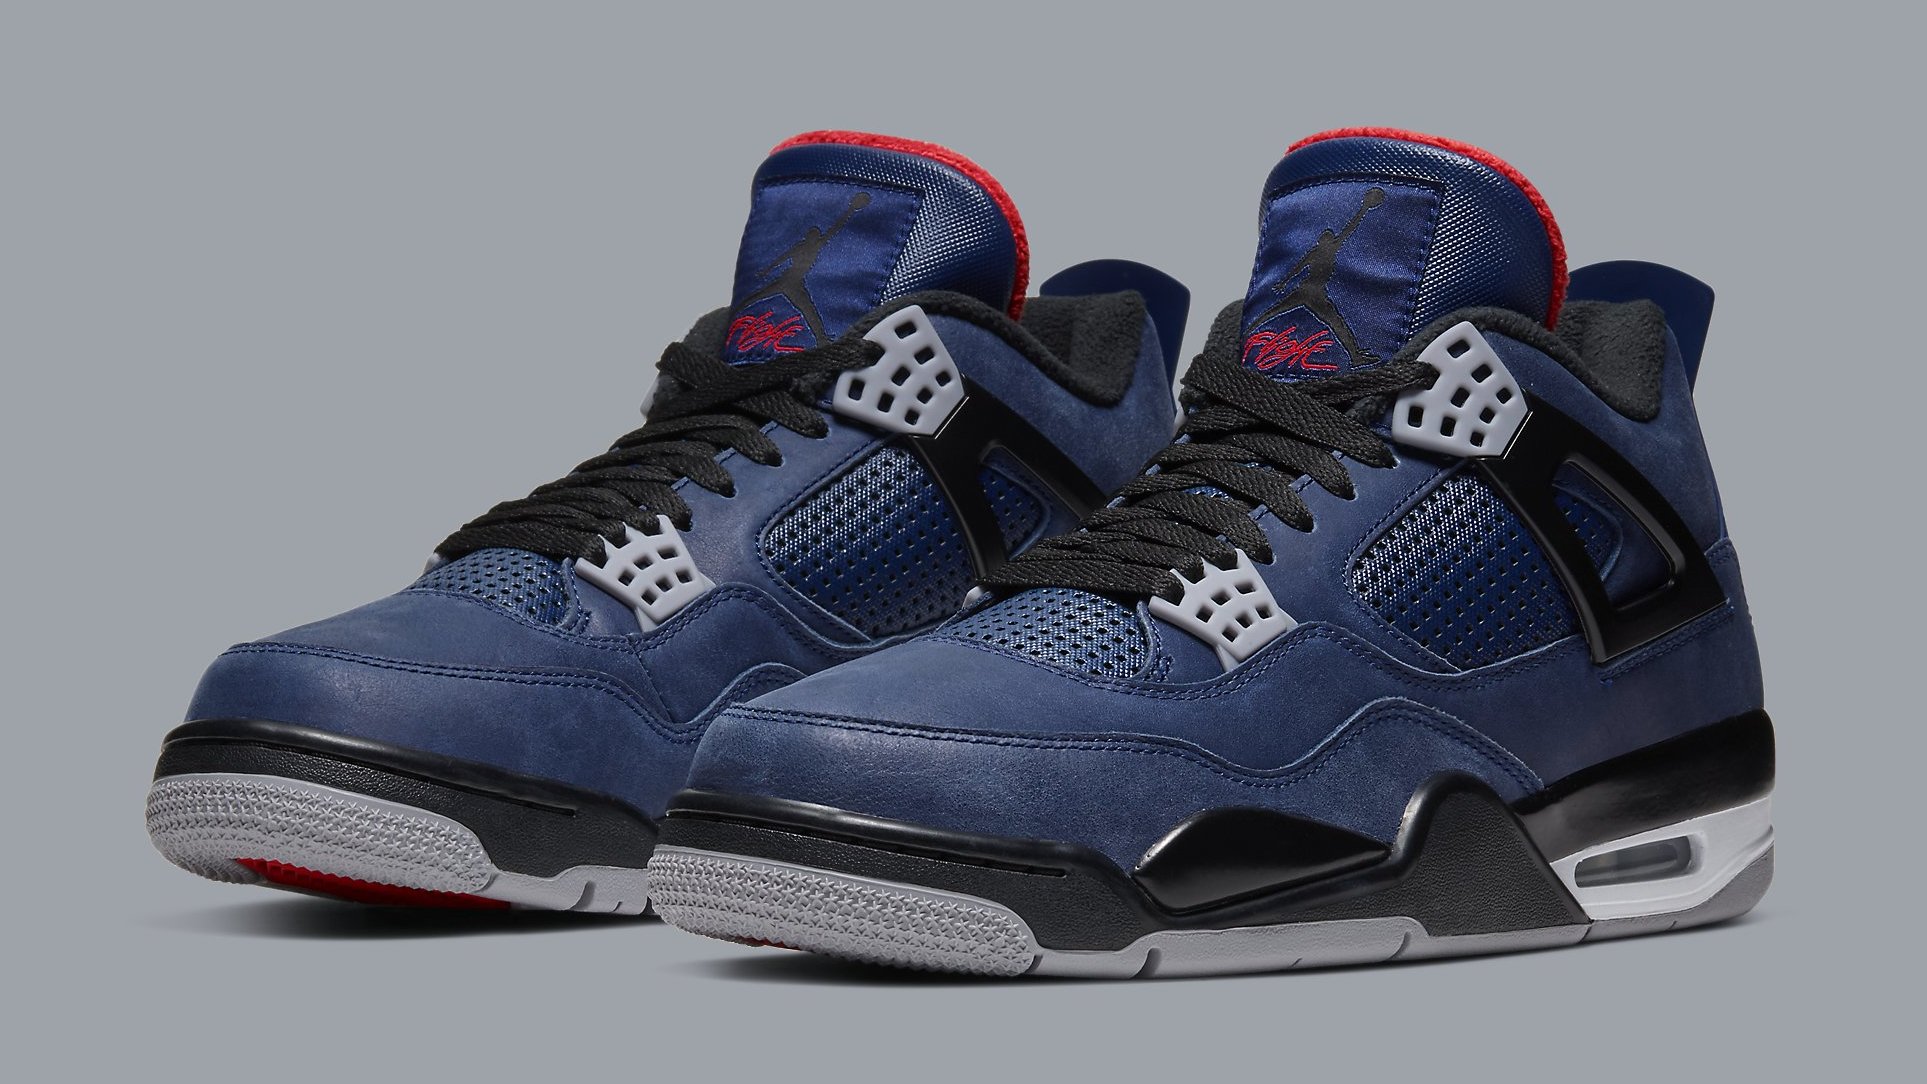 red and blue 4s jordans